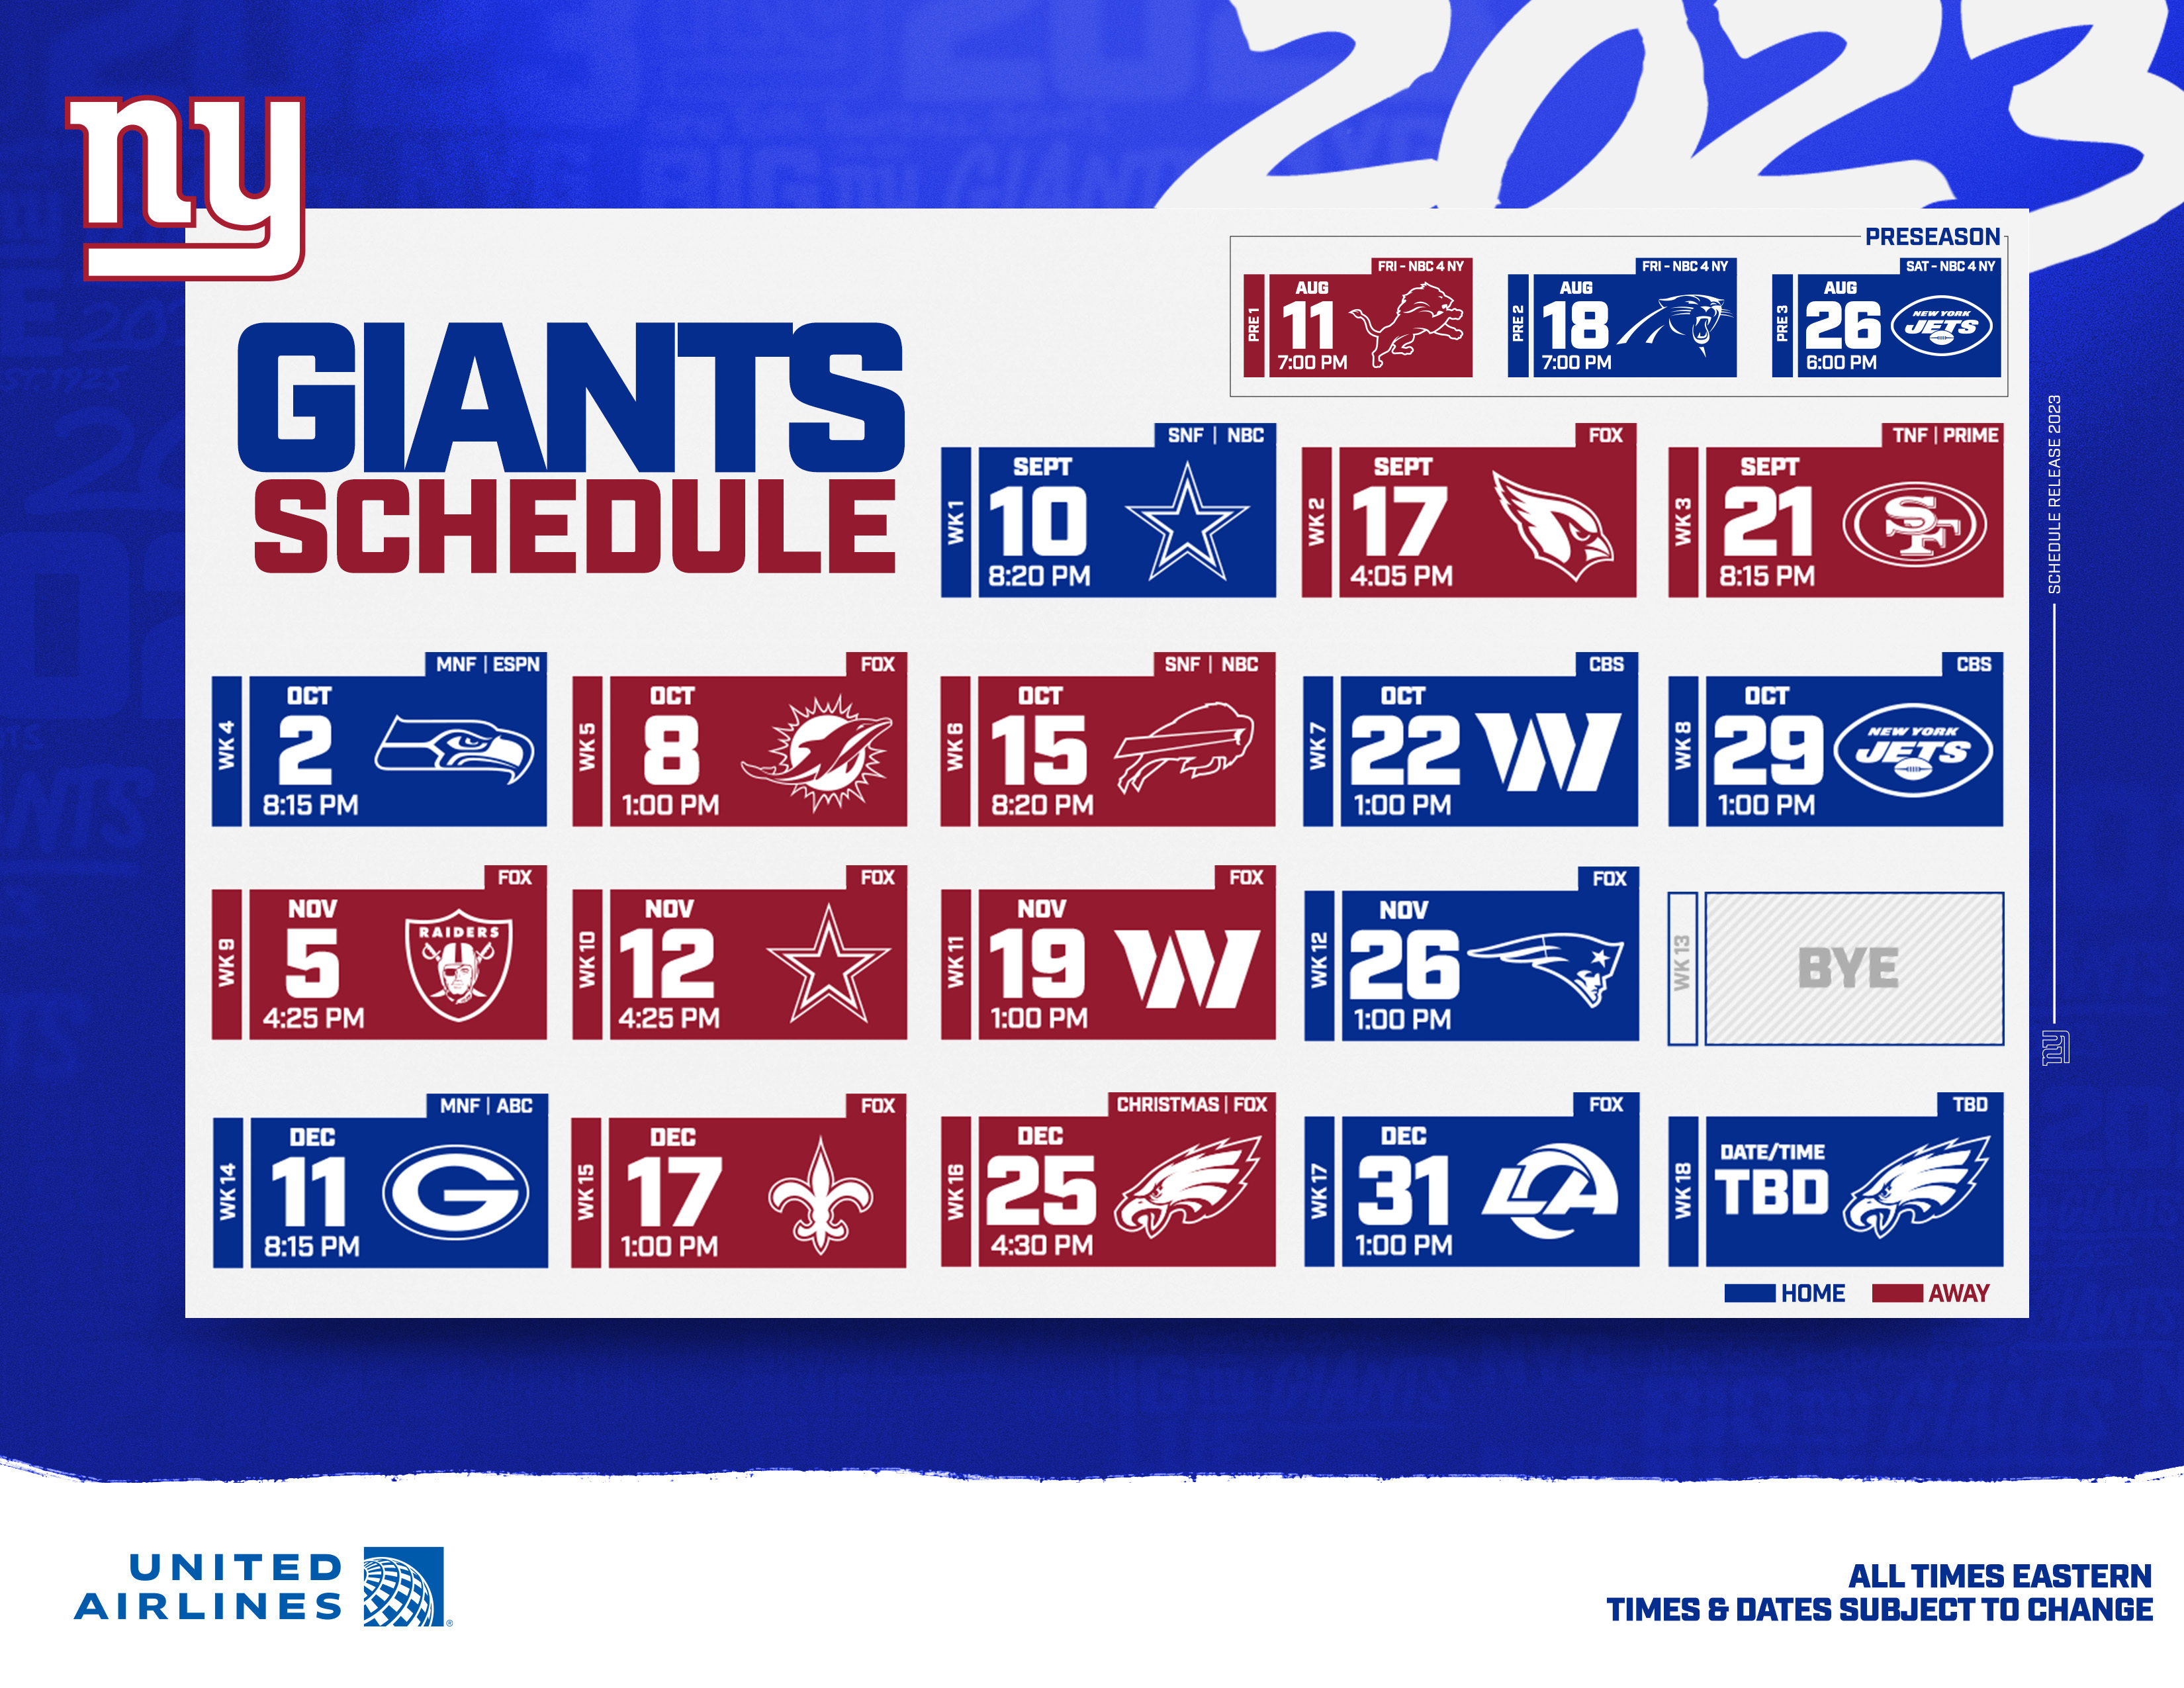 next game for the new york giants